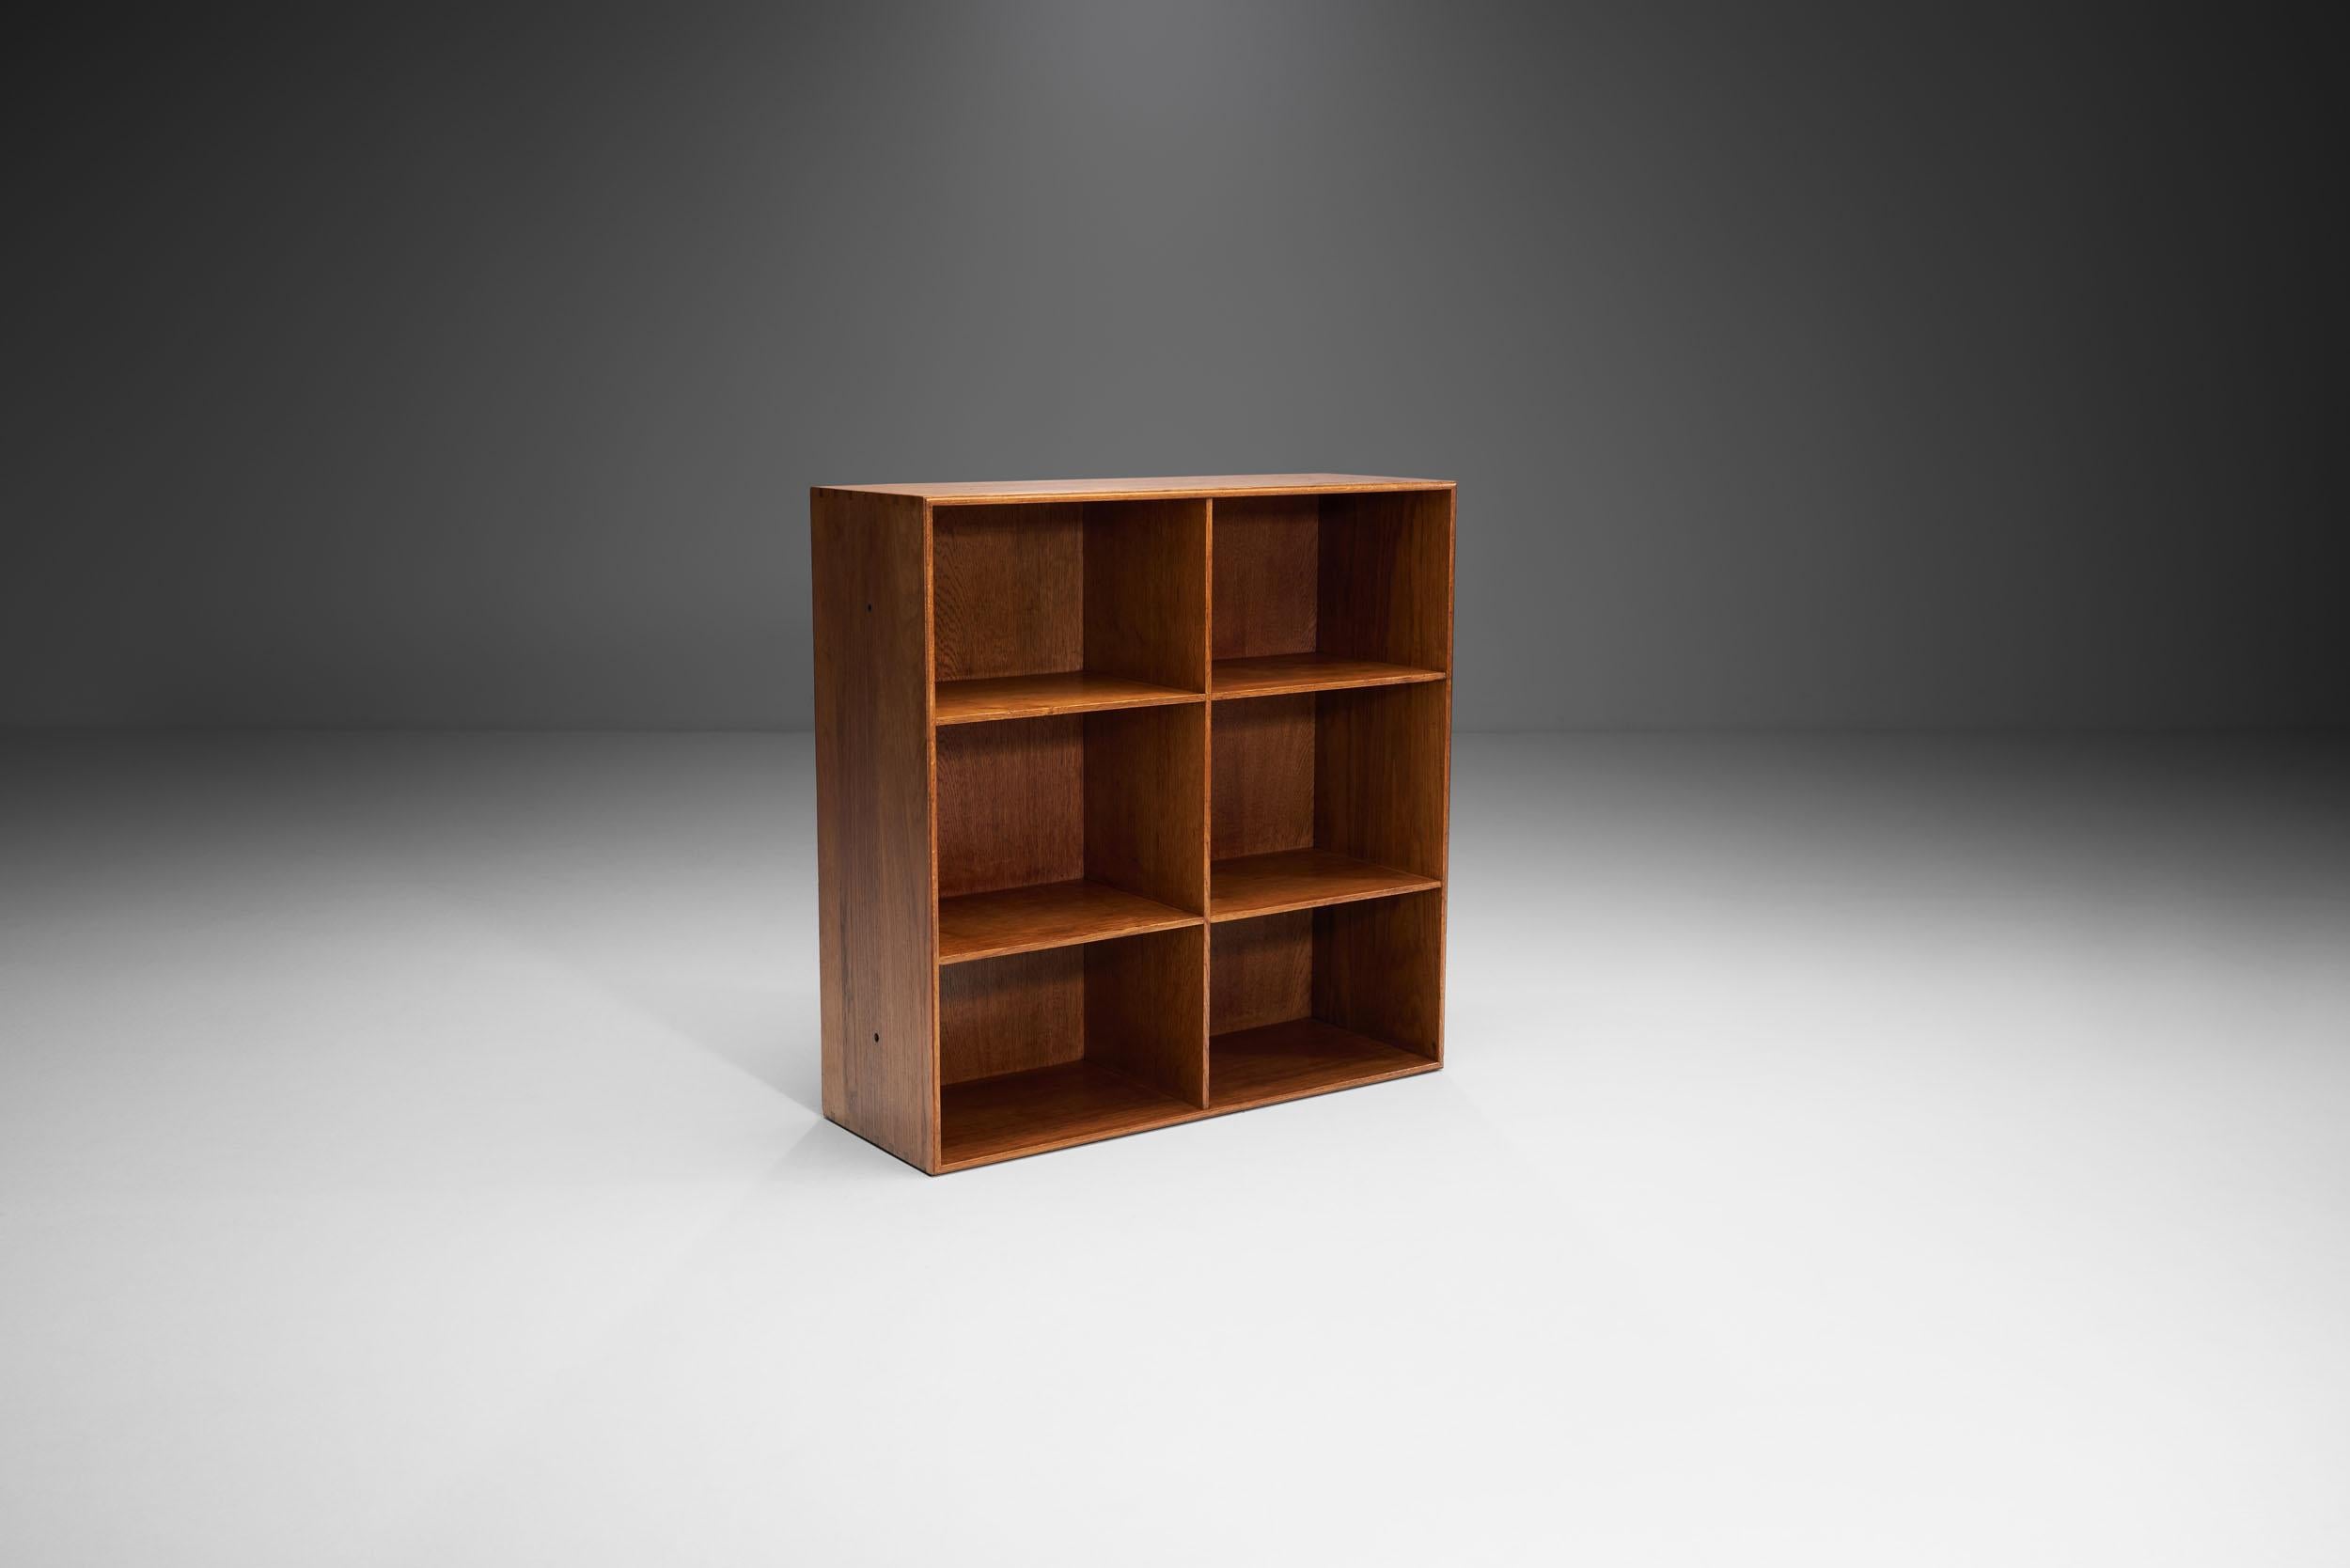 Mogens Koch's most famous piece of furniture is the square book case which was designed for his own home in 1928. This bookcase reflects the Danish designer’s aesthetic that was clean and highly functional, creating pieces that stand out despite